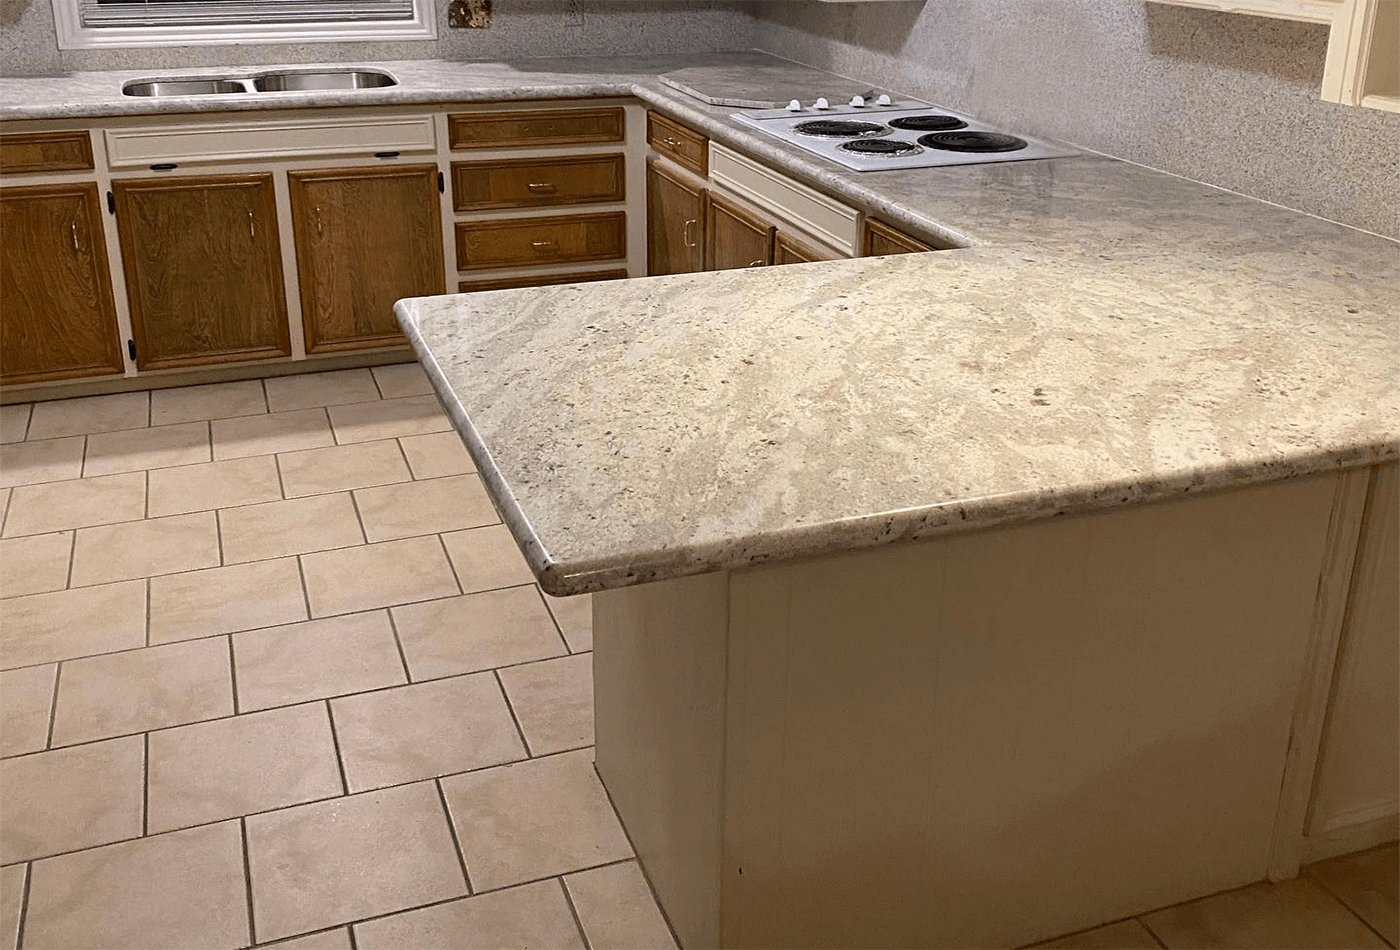 Let's Get into the Detailed View of the White Granite Counter